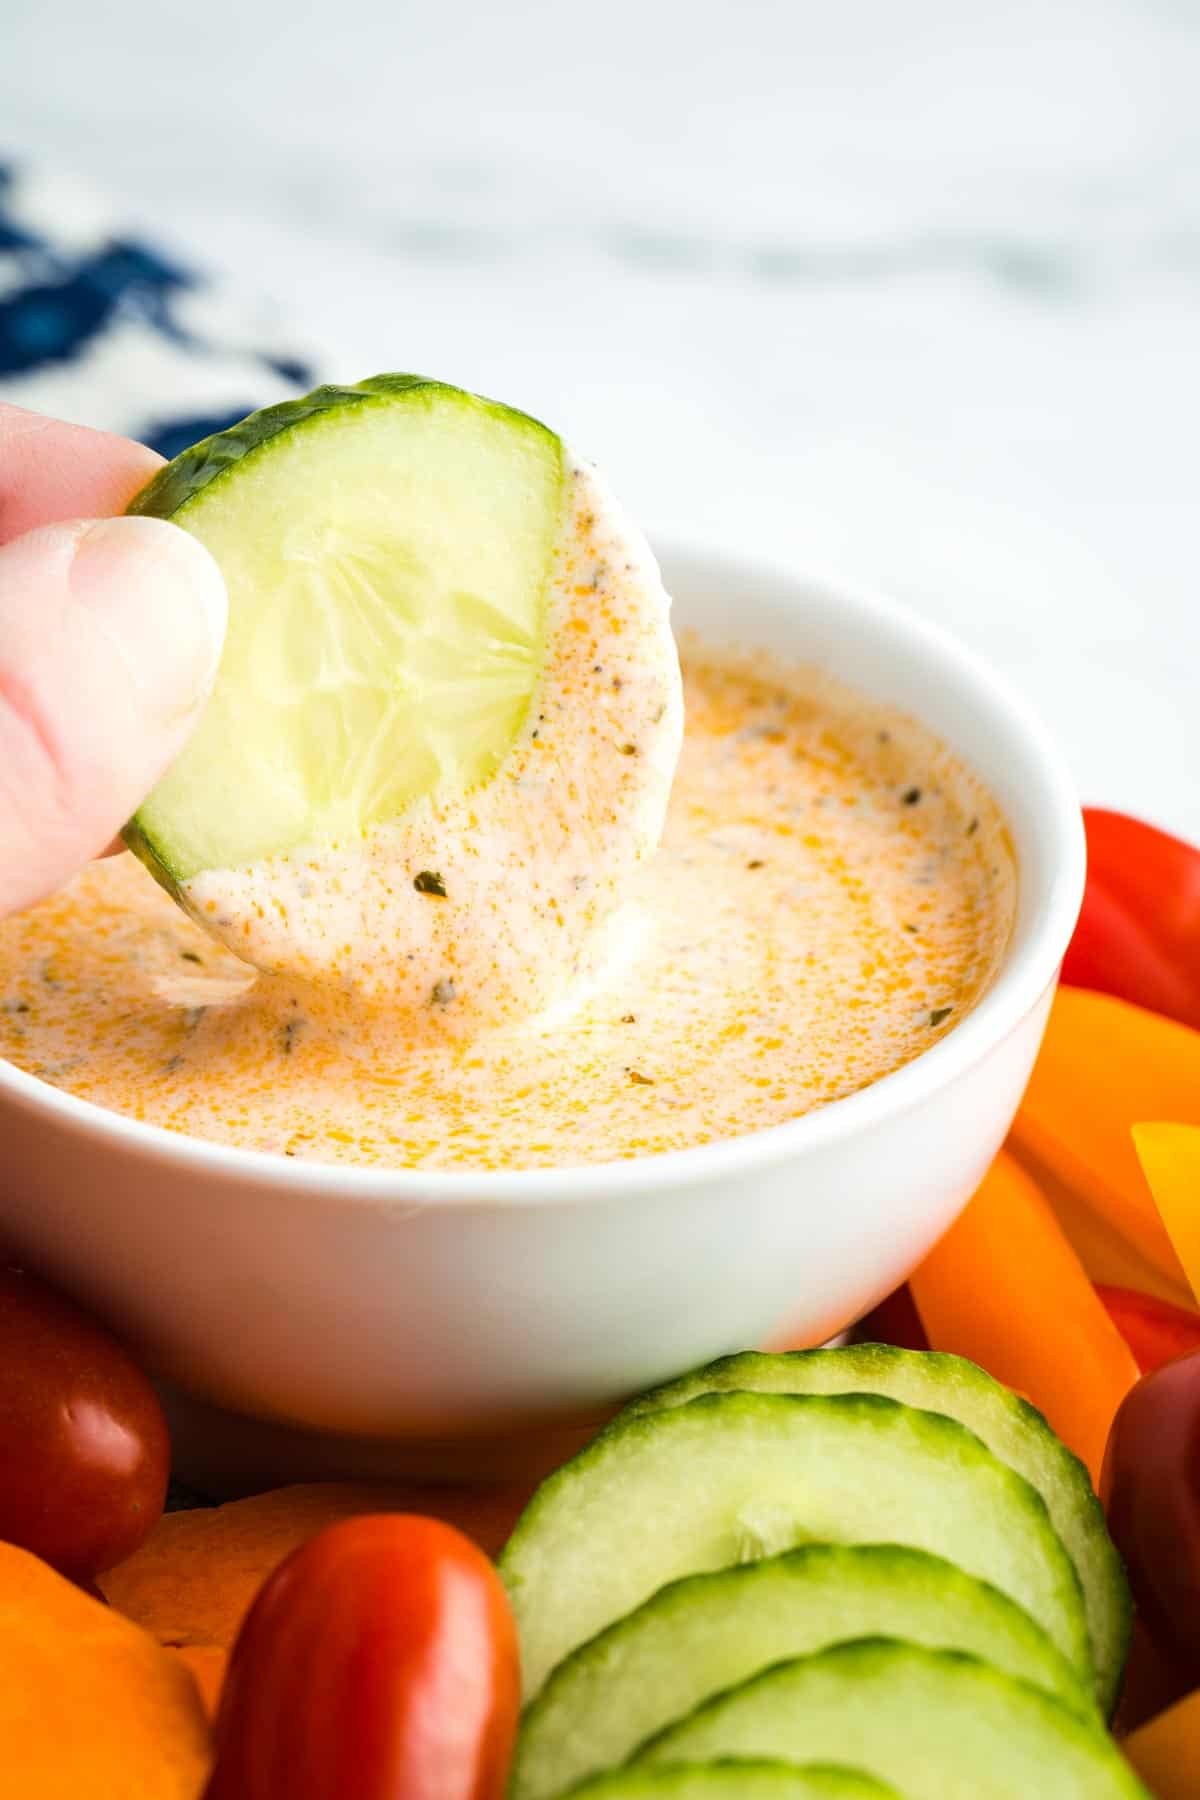 A hand dips a slice of cucumber into a bowl of buffalo ranch sauce.